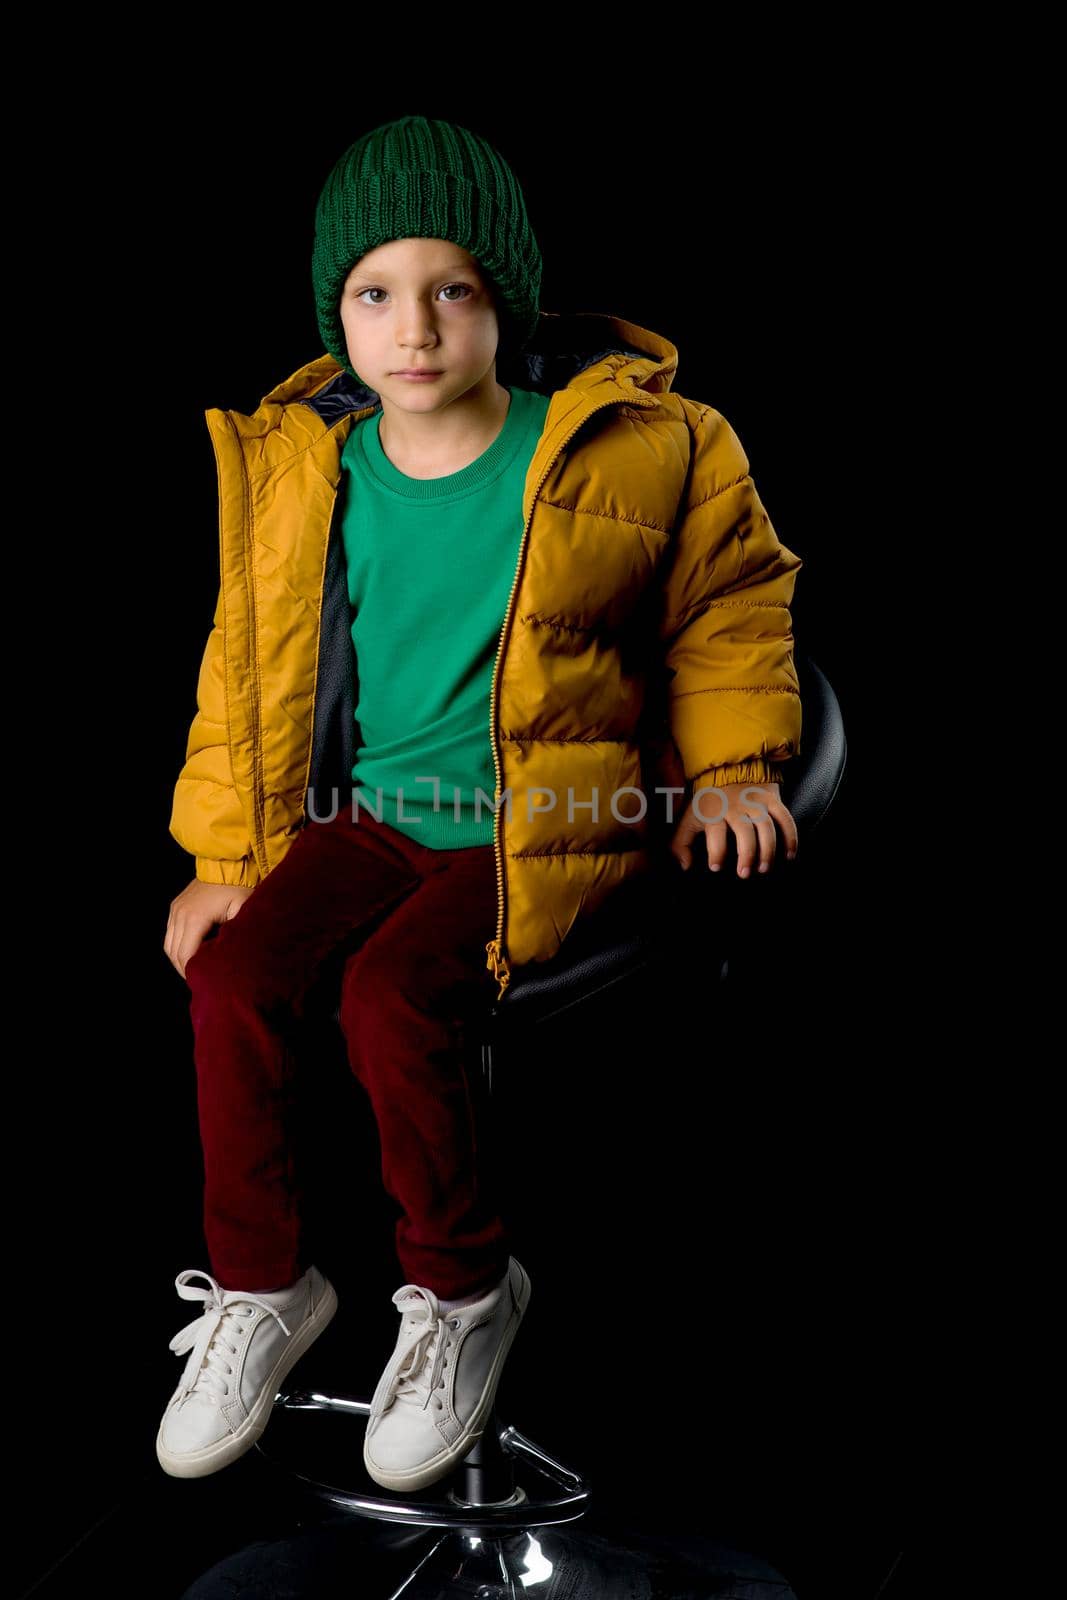 Cute boy in winter jacket and knitted hat. Stylish cheerful boy sitting on chair posing at camera in studio. Child wearing fashionable winter outerwear isolated on black background